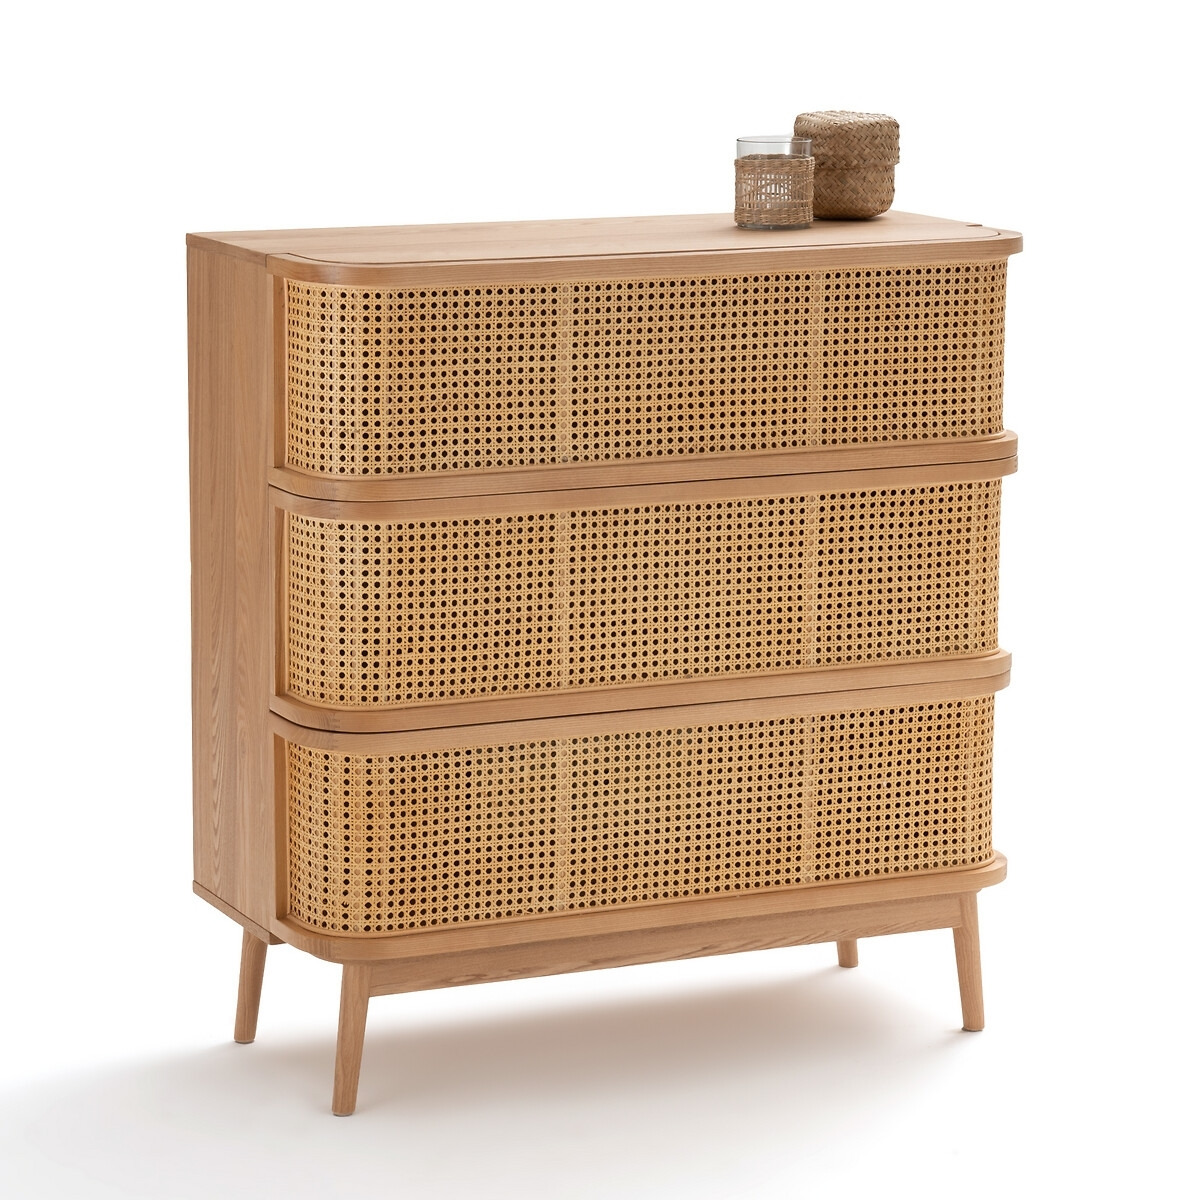 Laora Cane Chest of 3 Drawers - image 1